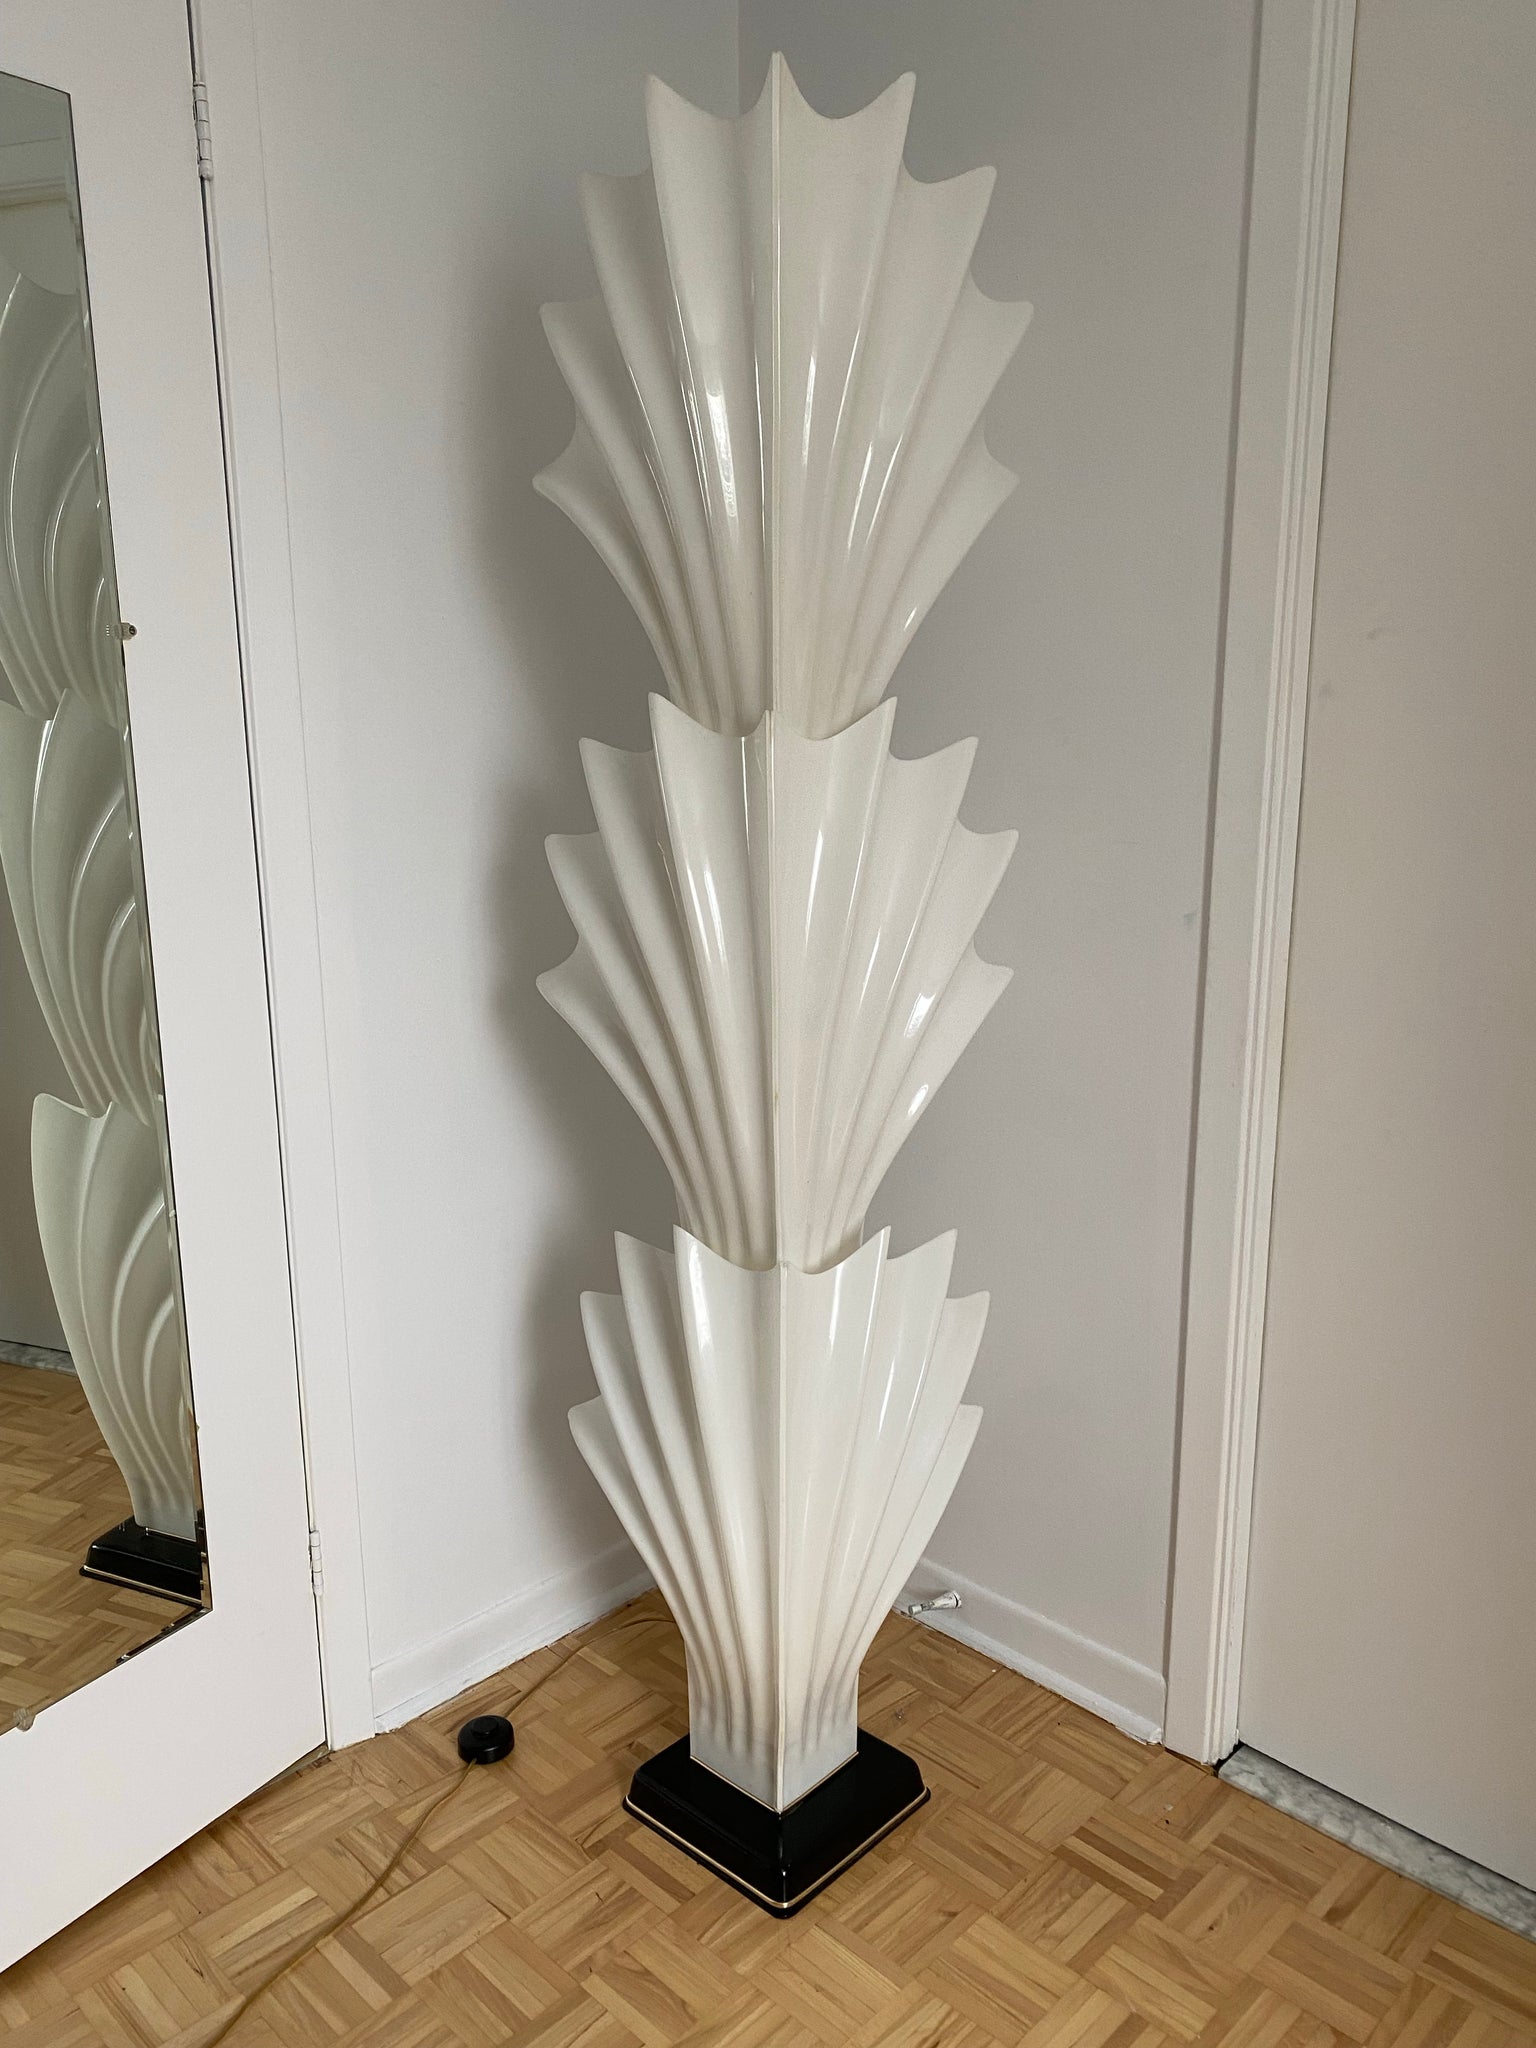 Stunning white lucite seashells floor lamp by Rougier *accepting offers*